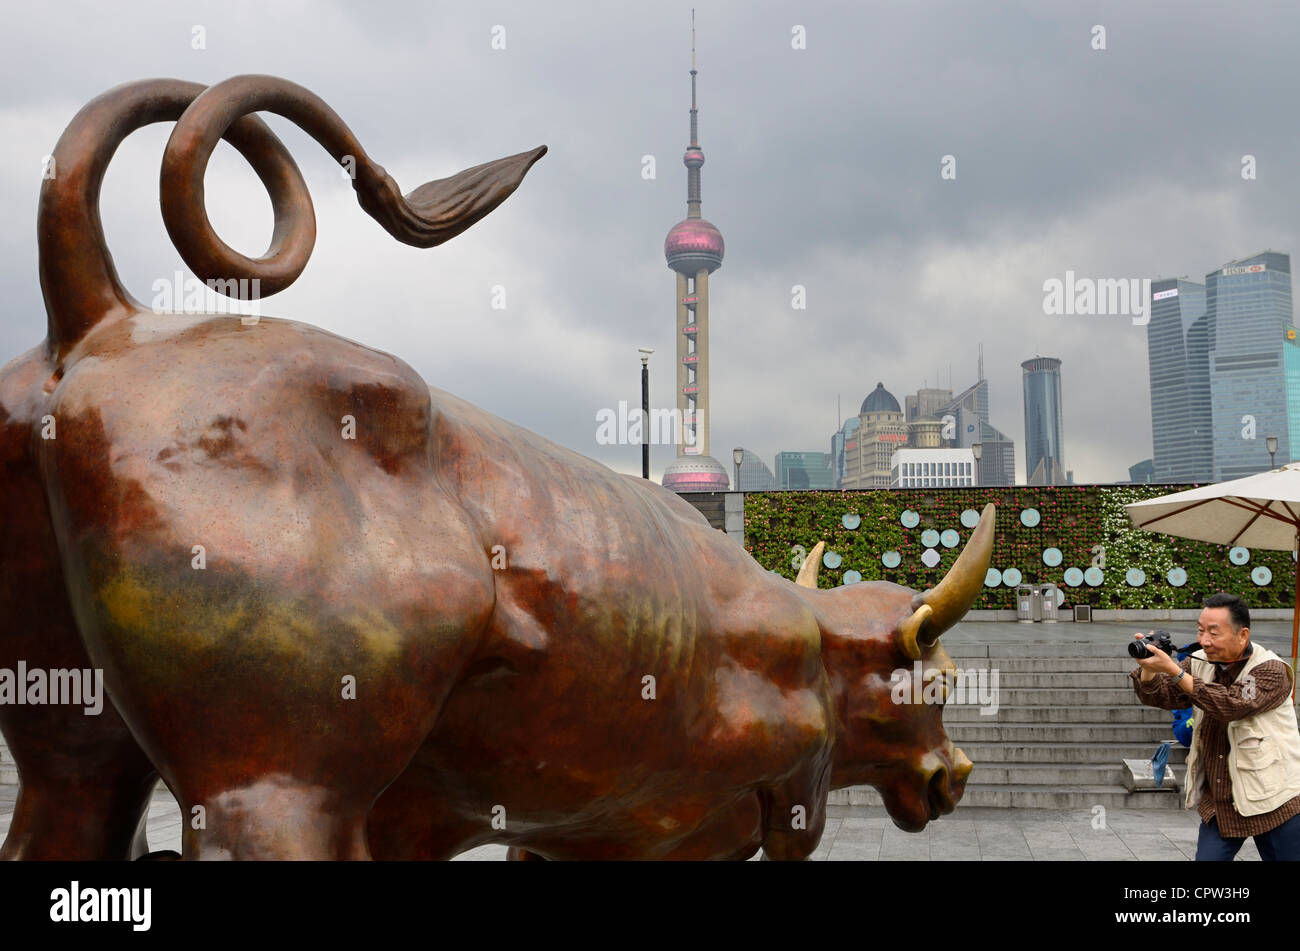 Tourist taking picture of the Bund bull with Shanghai skyline financial towers Peoples Republic of China Stock Photo